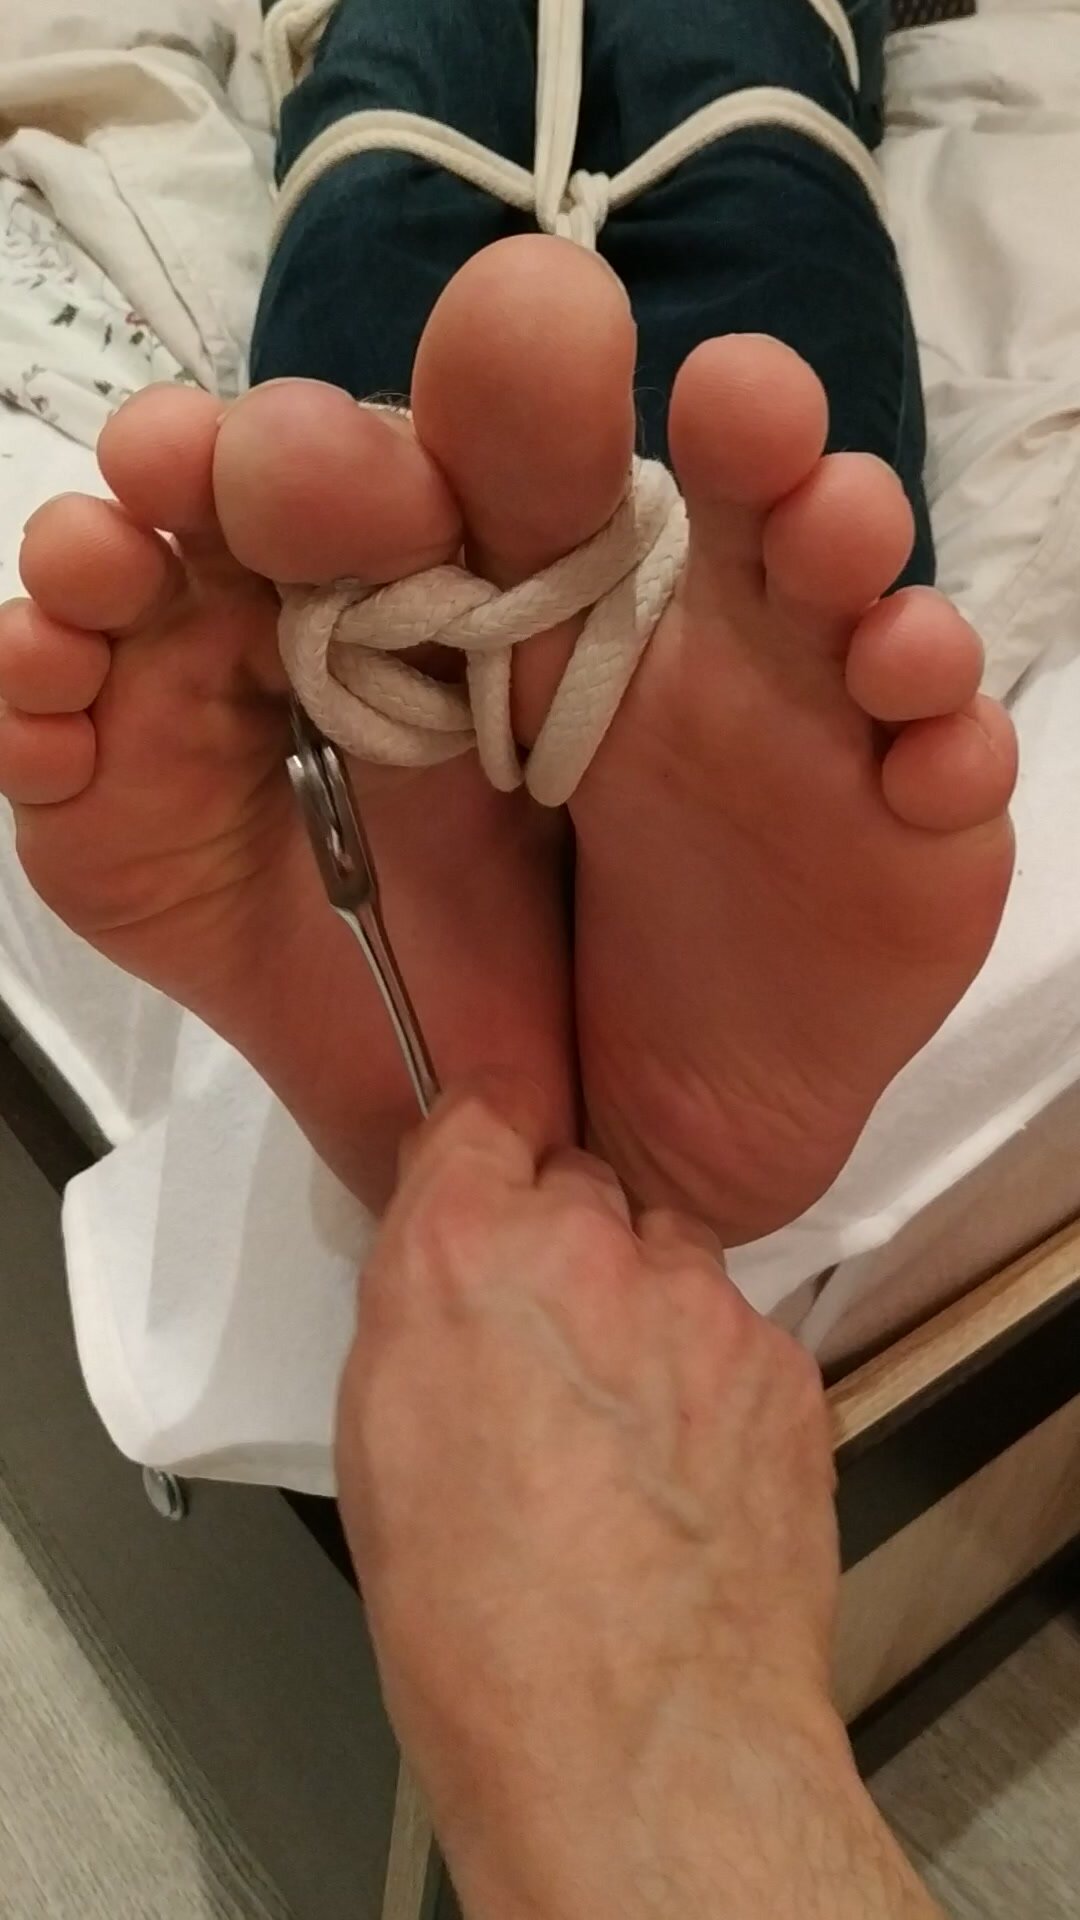 Bound feet and an ugly wheel